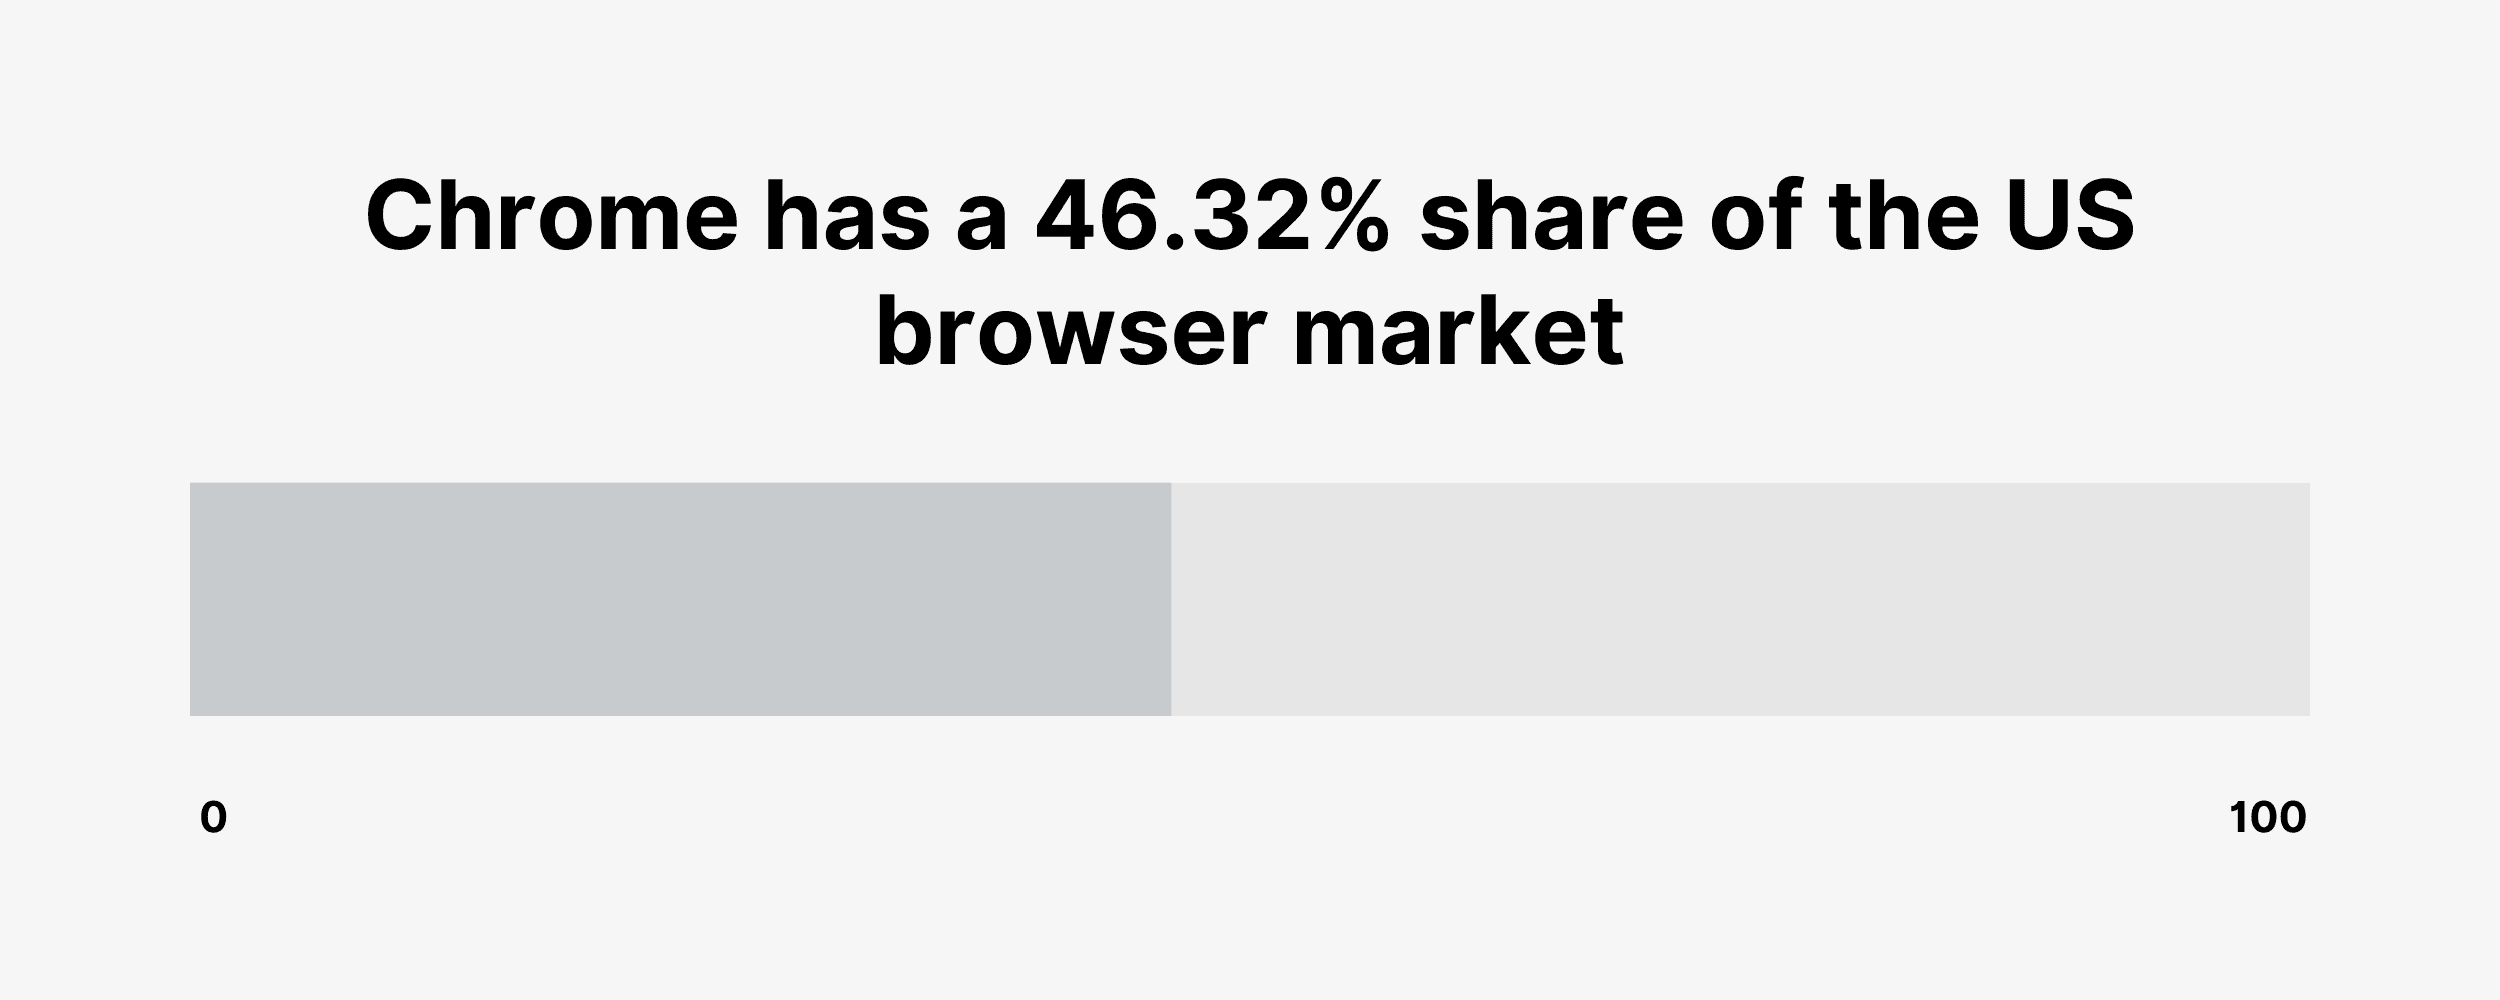 Chrome has a 46.32% share of the US browser market